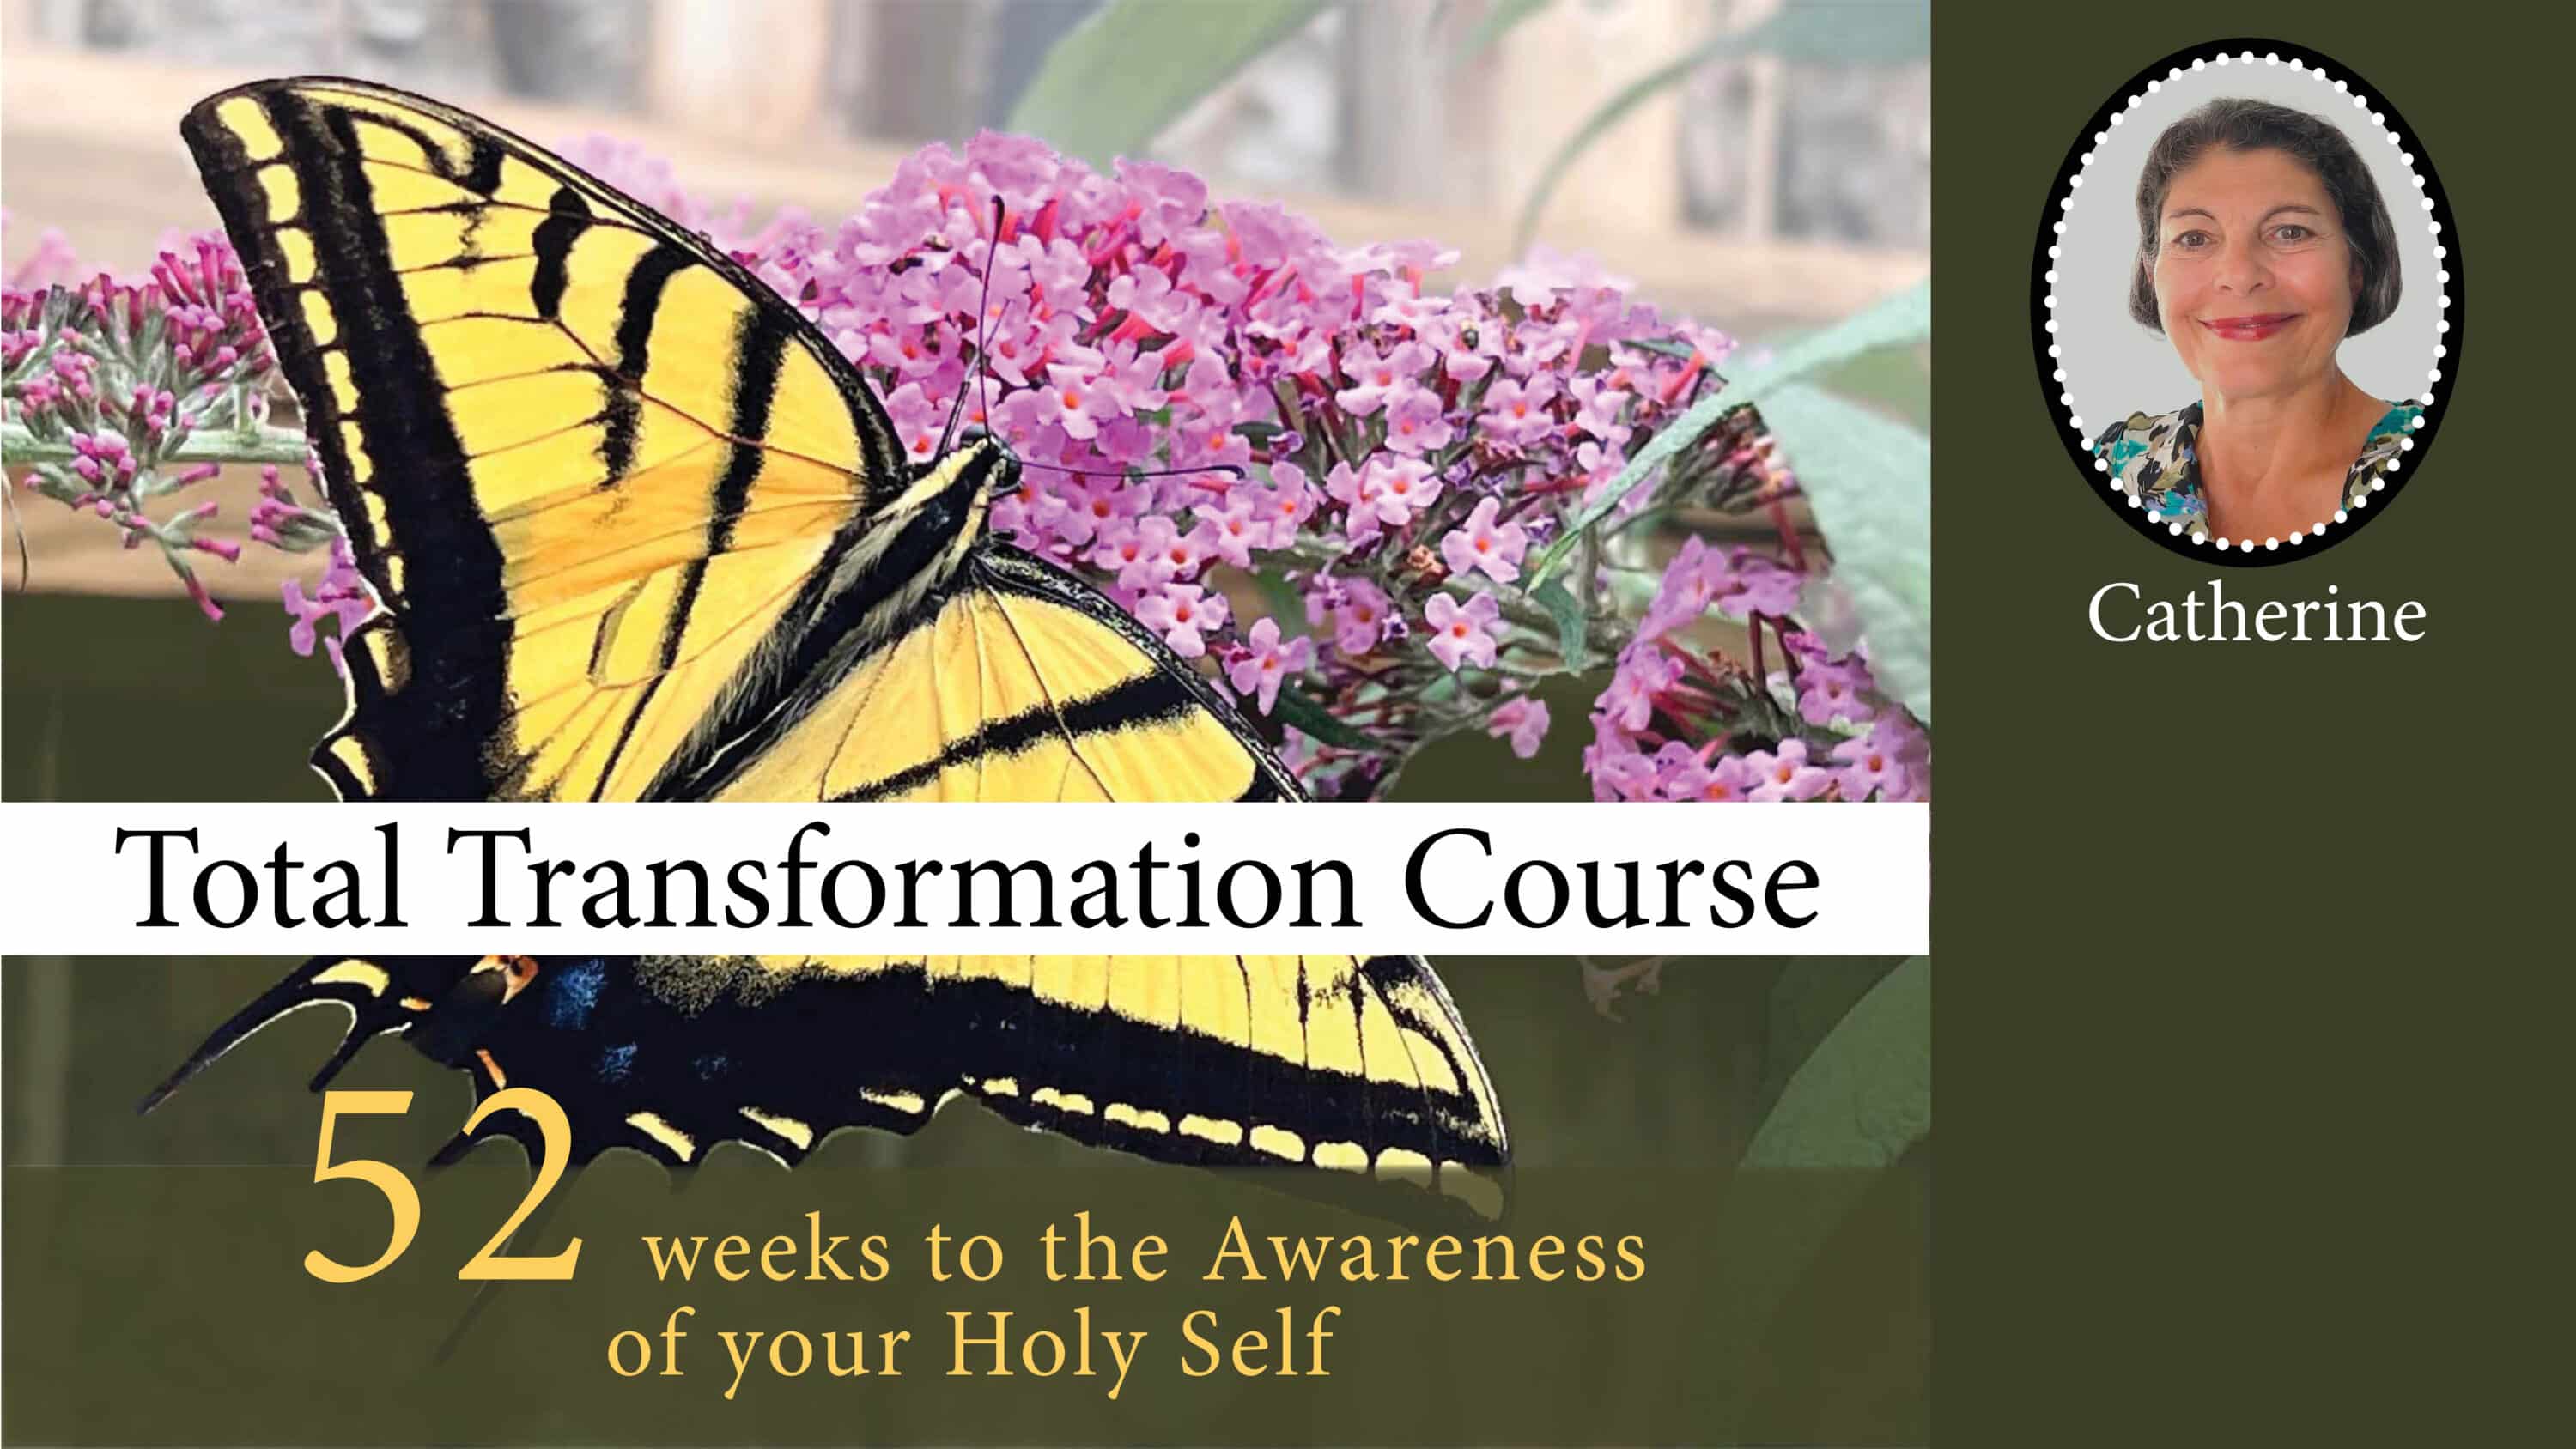 Total Transformation Course with Catherine